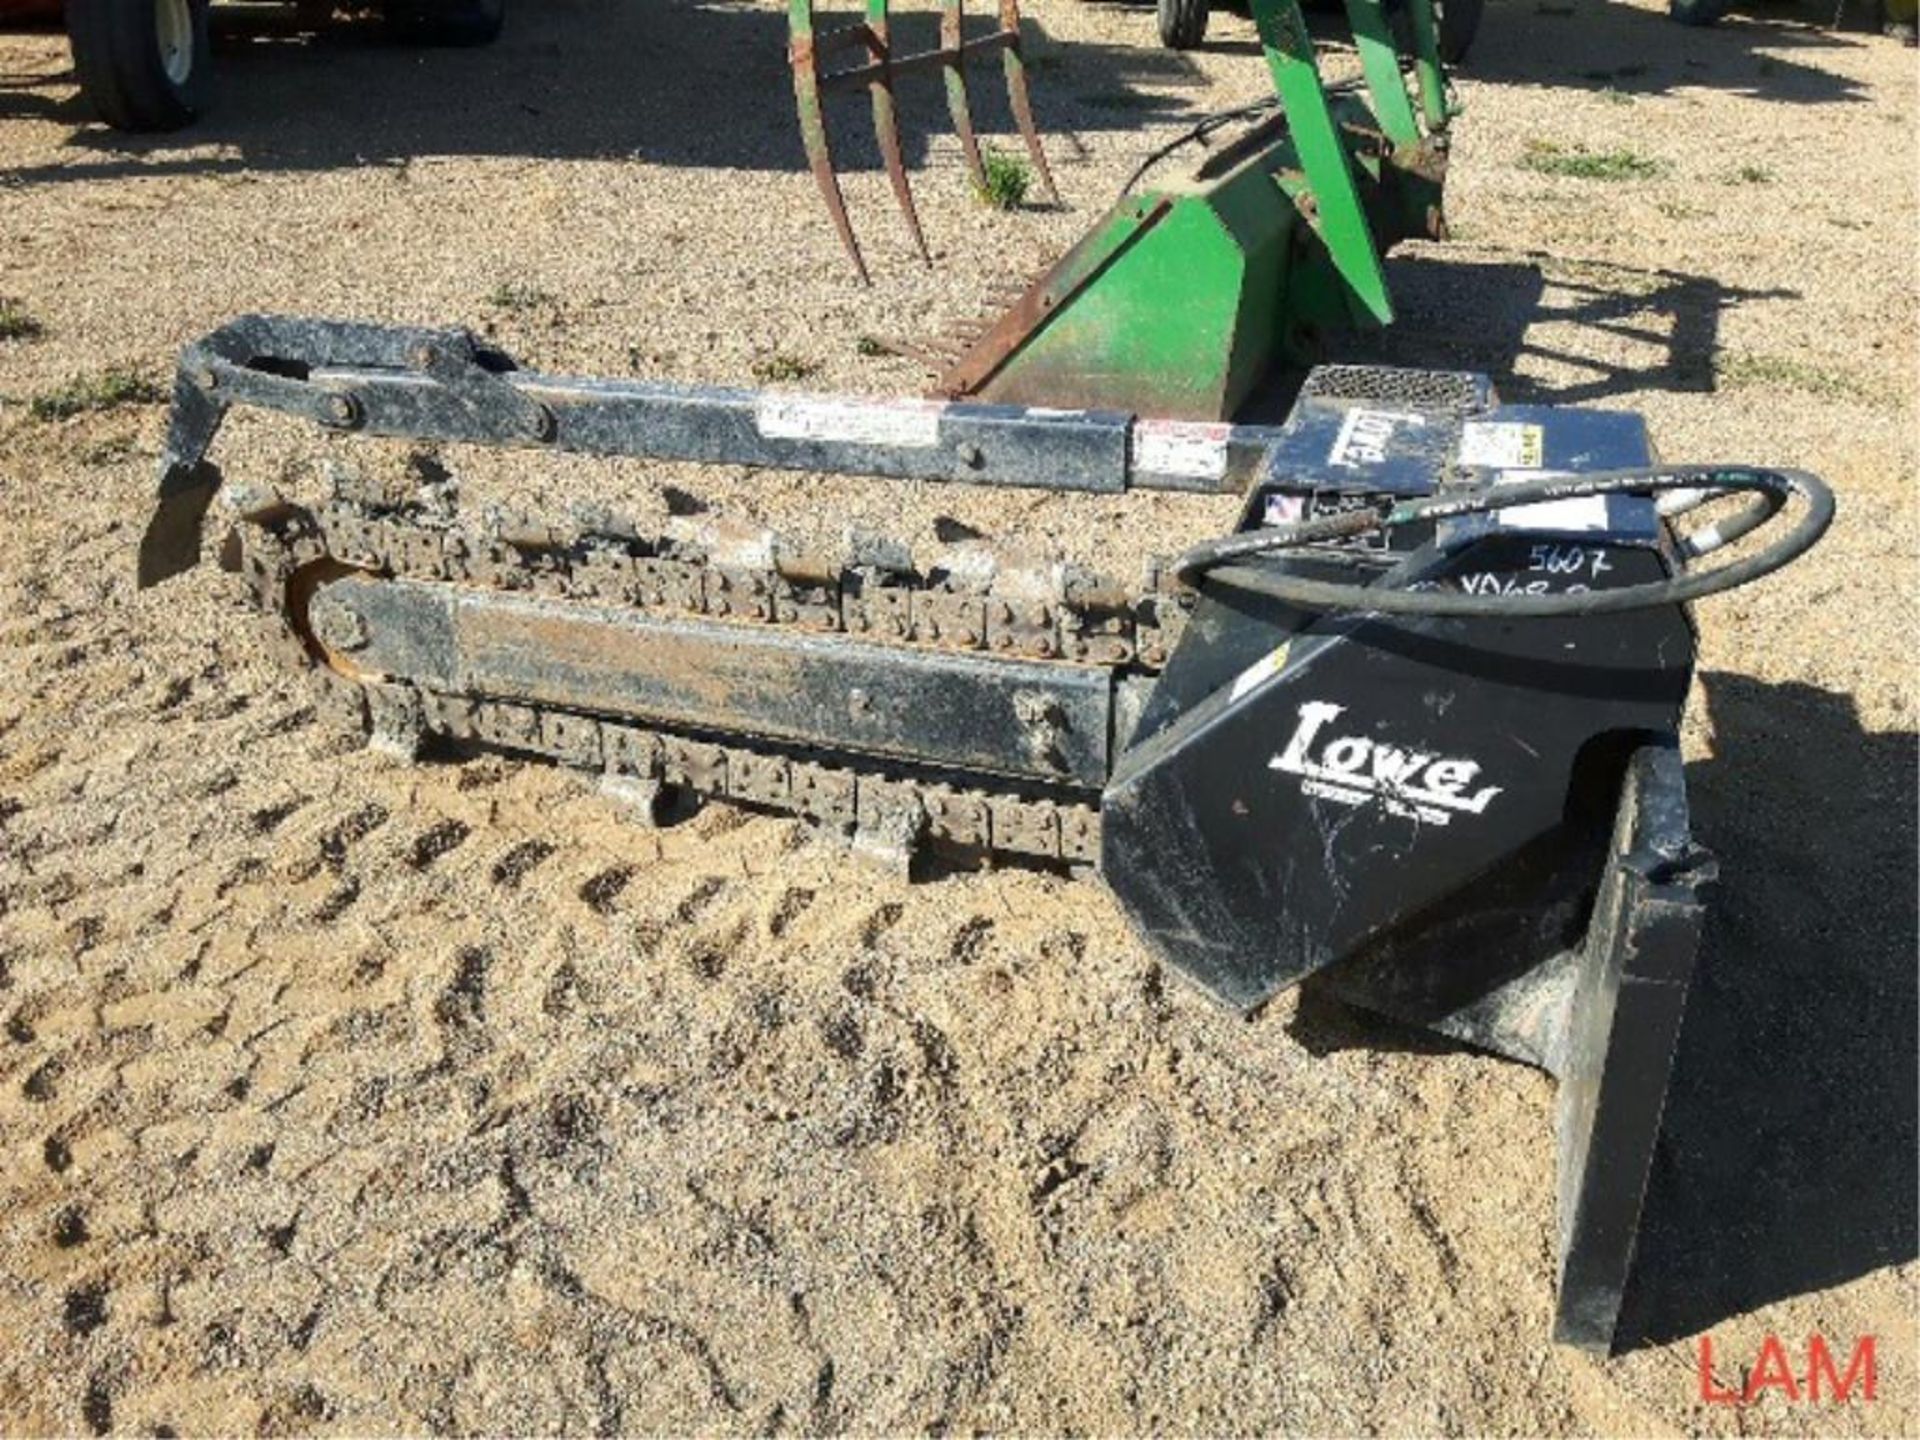 Lowe XR14F Chain Trencher Skidsteer Attachment sn 11304 - Image 2 of 3